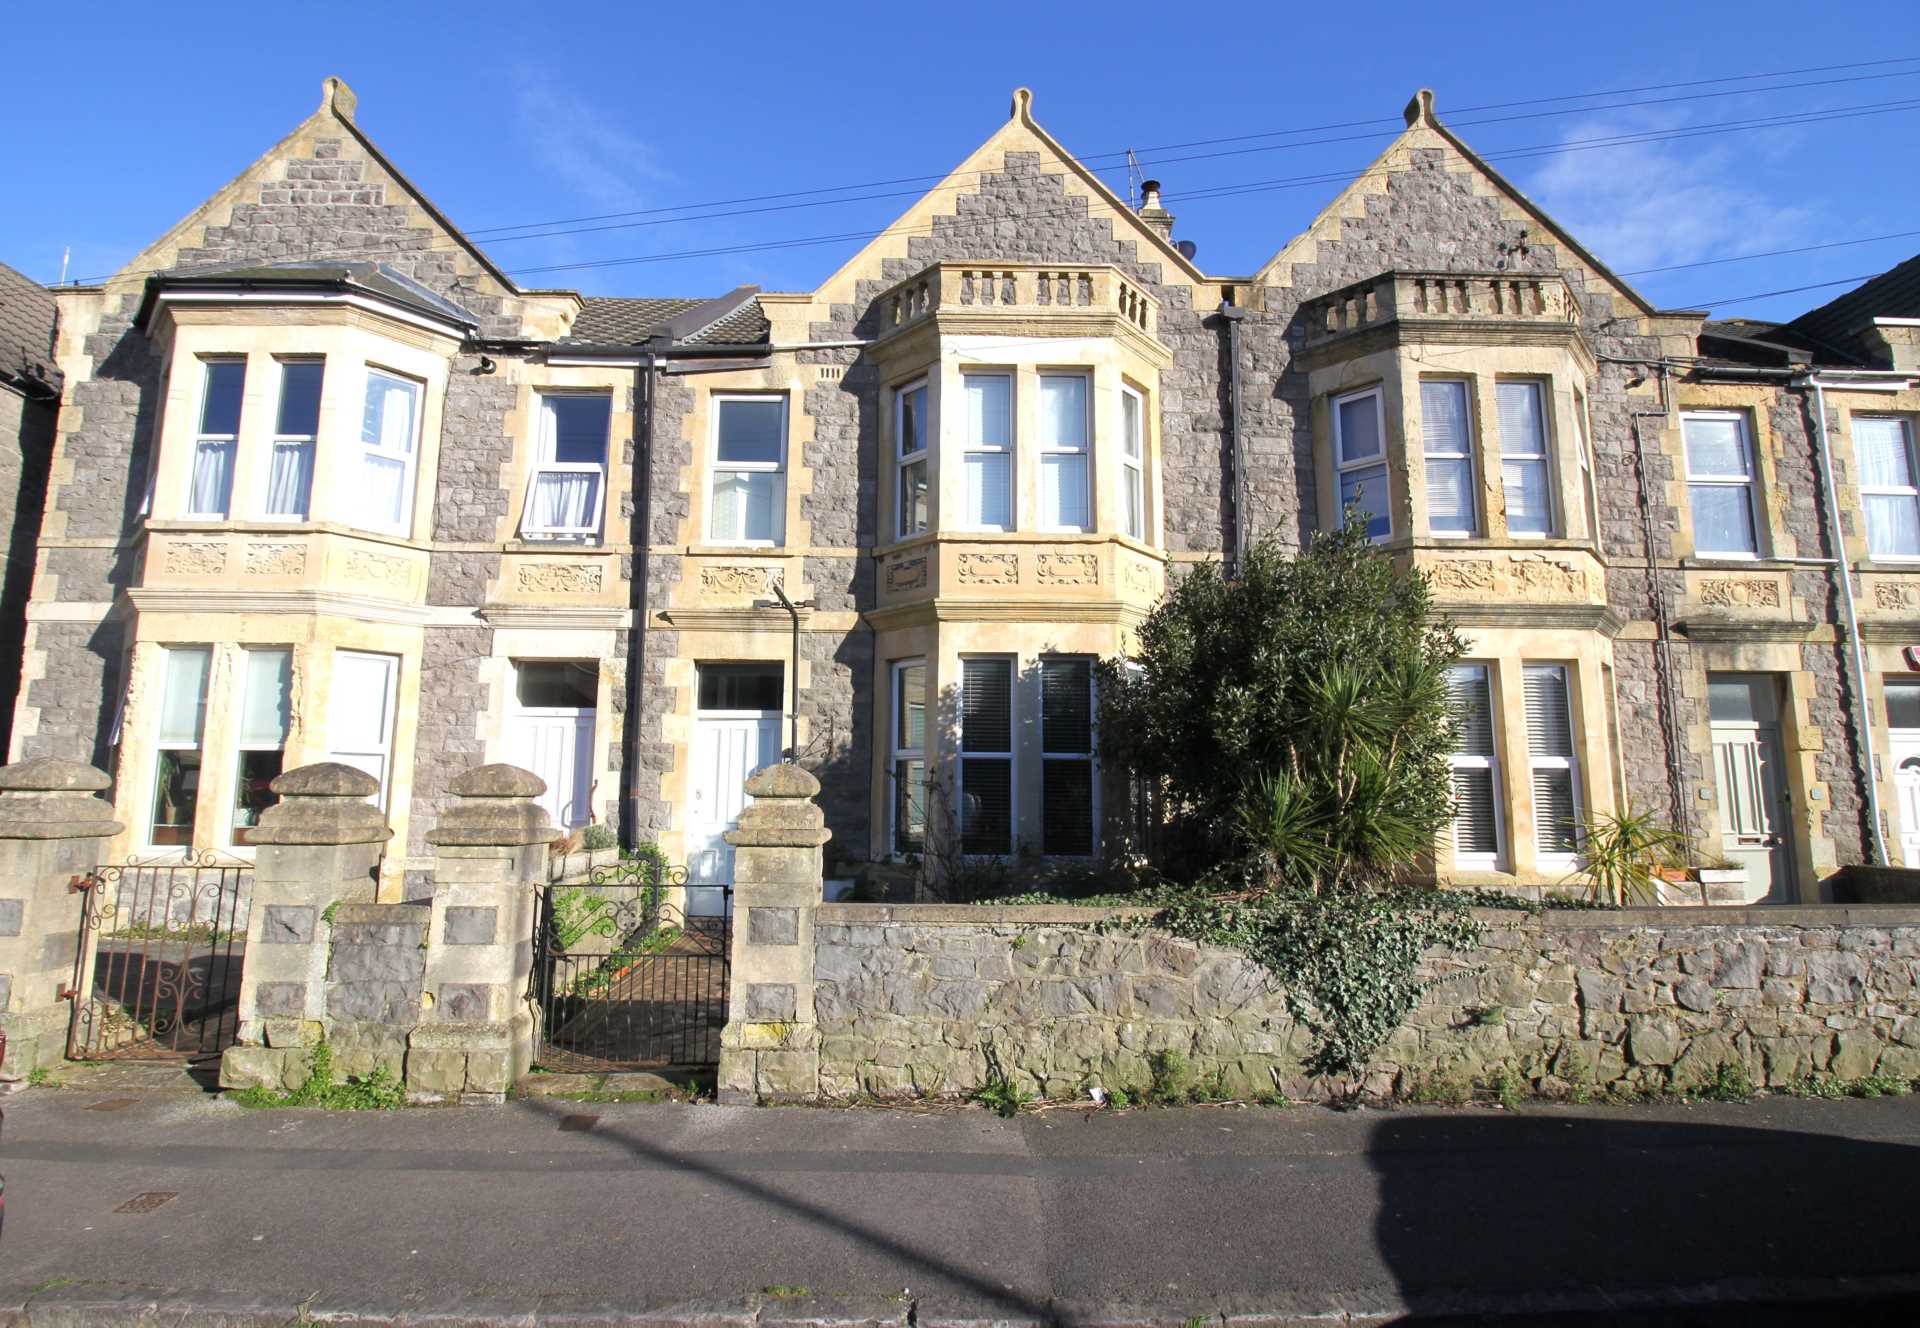 Whitecross Road-Substantial Victorian Property, Image 1